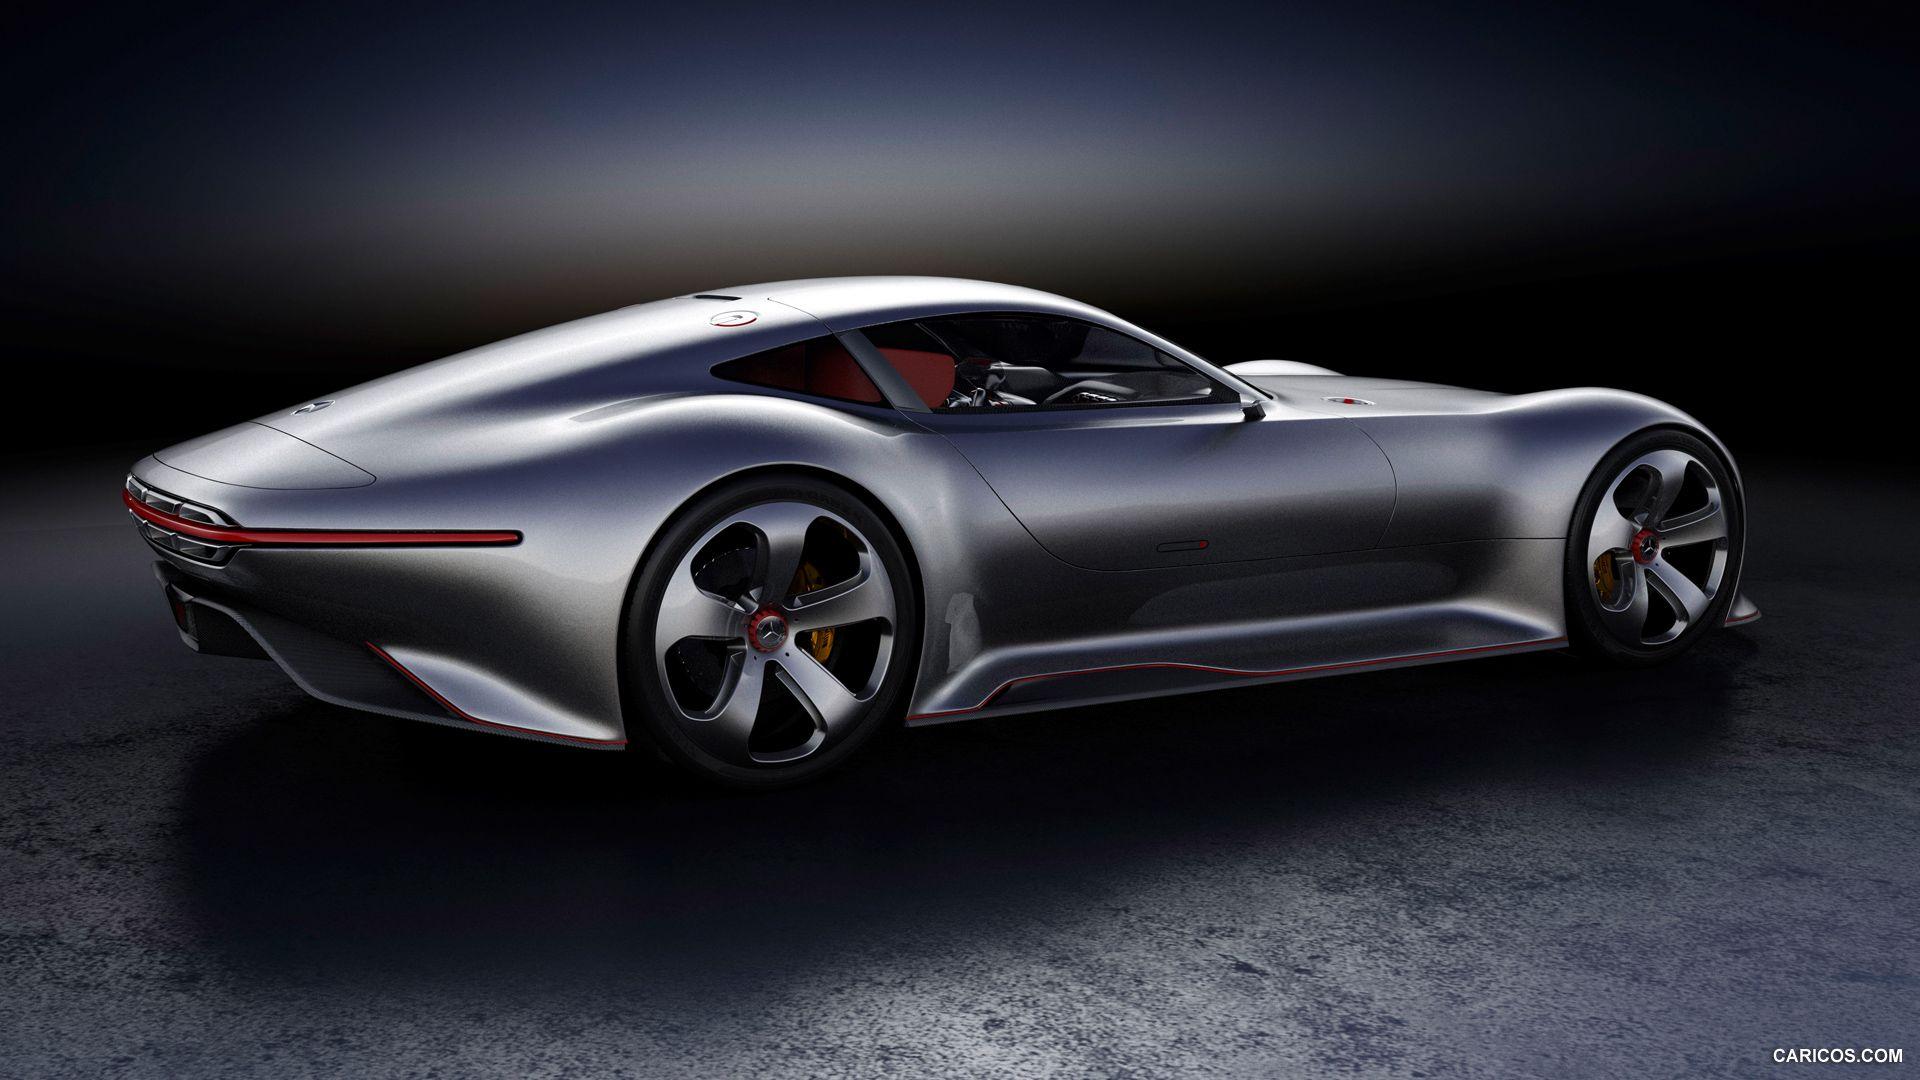 Mercedes Concept Cars Wallpapers - Top Free Mercedes Concept Cars ...